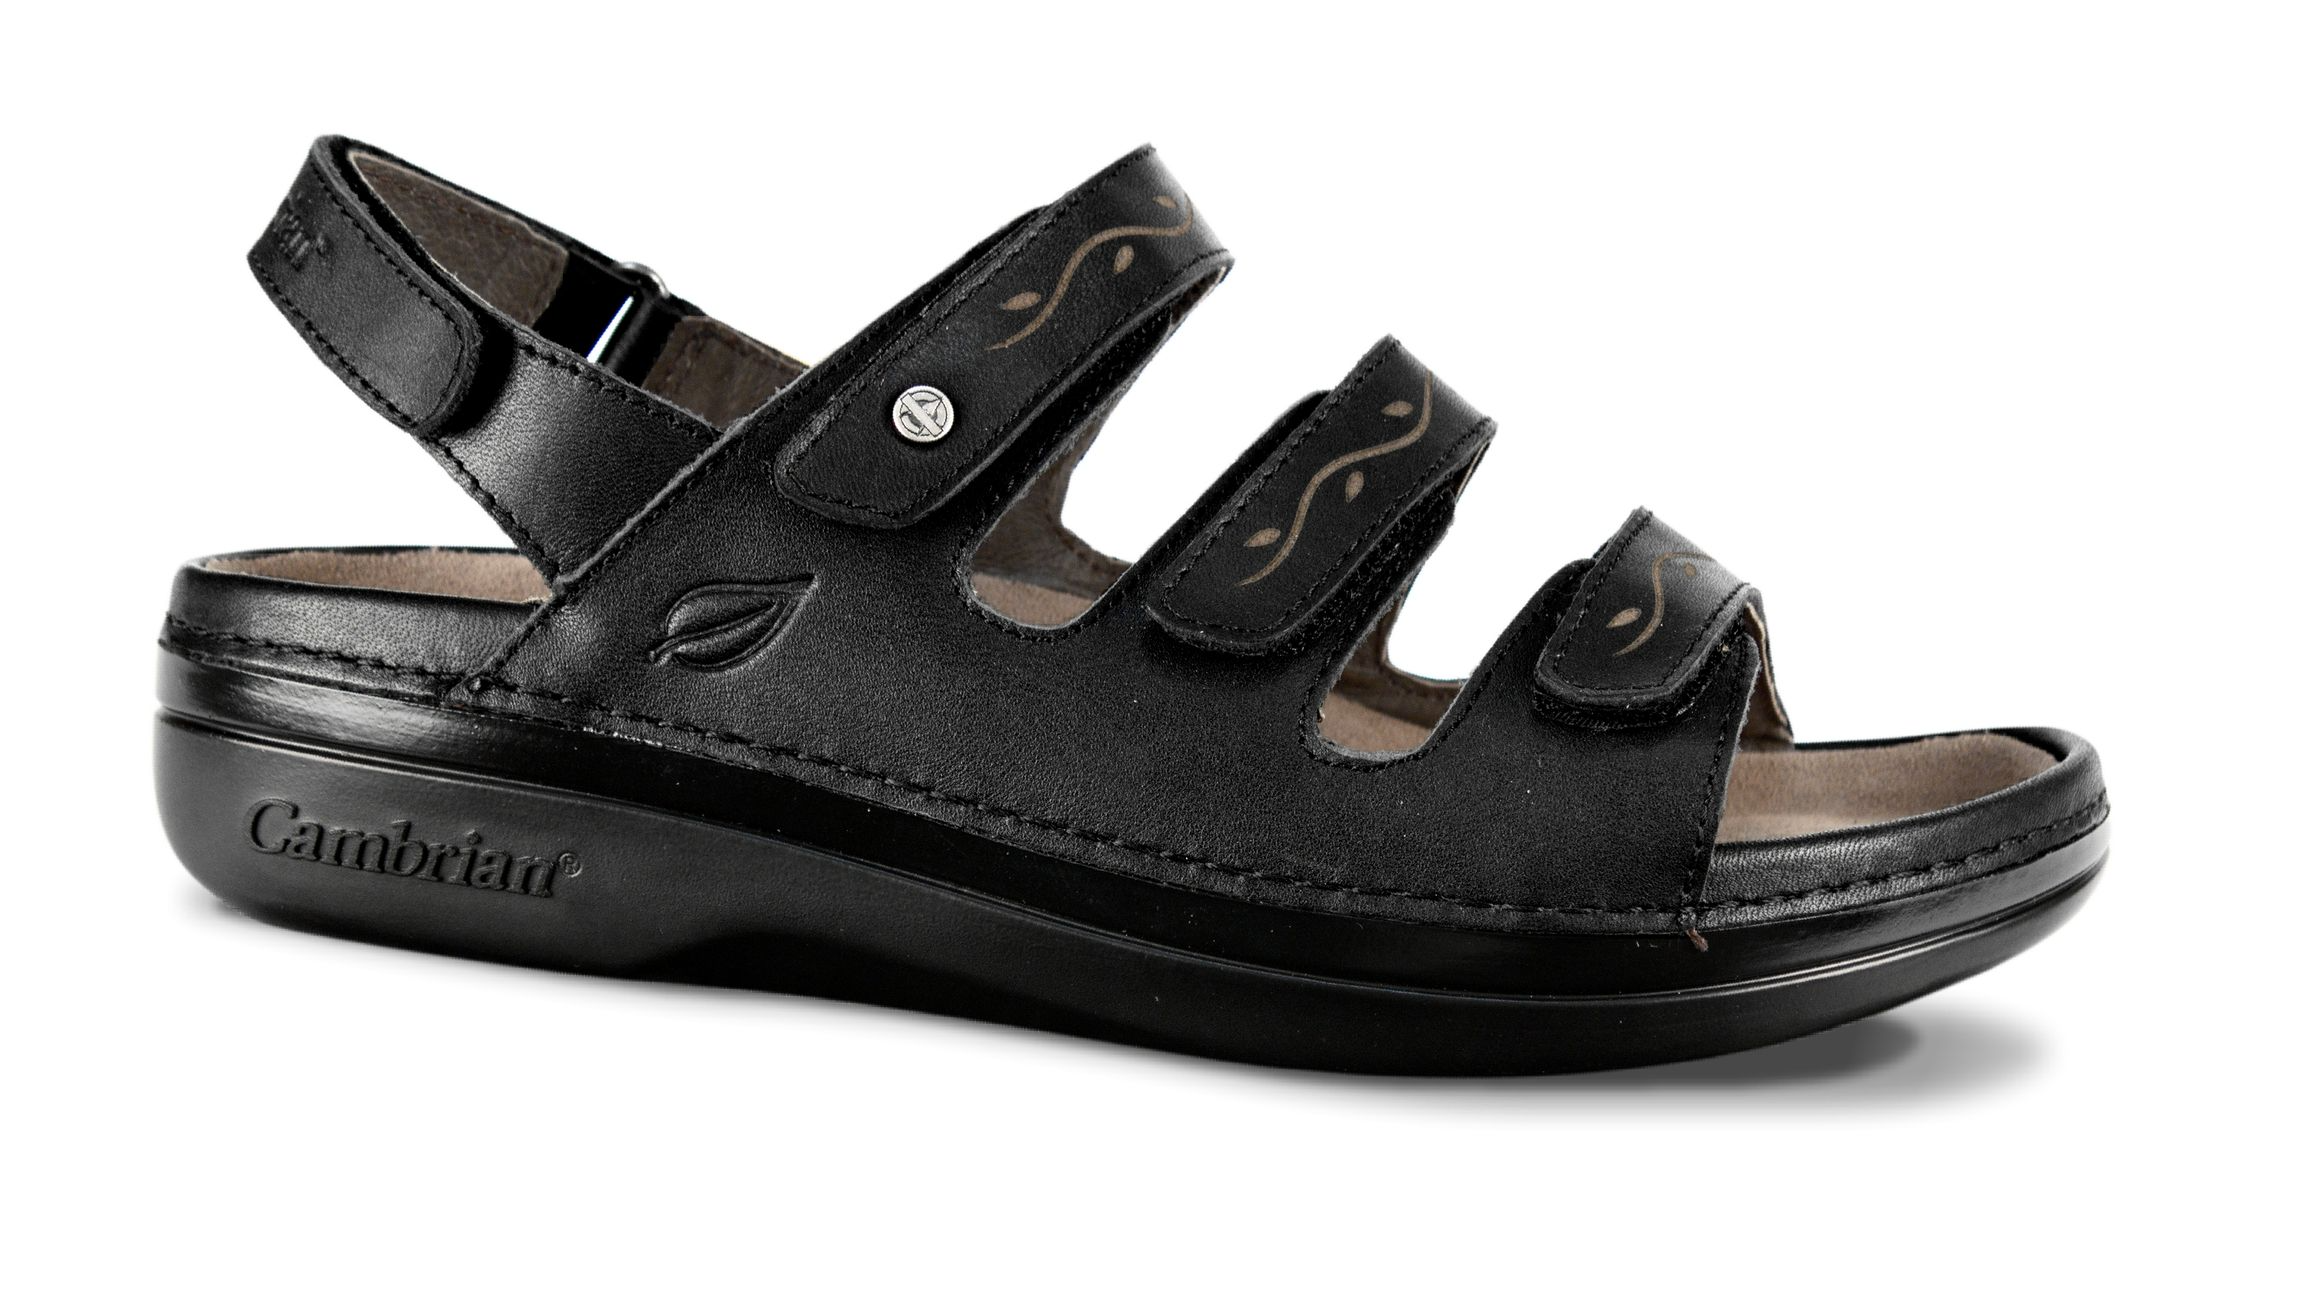 Cambrian Delphi (Ultimate fitting sandal)